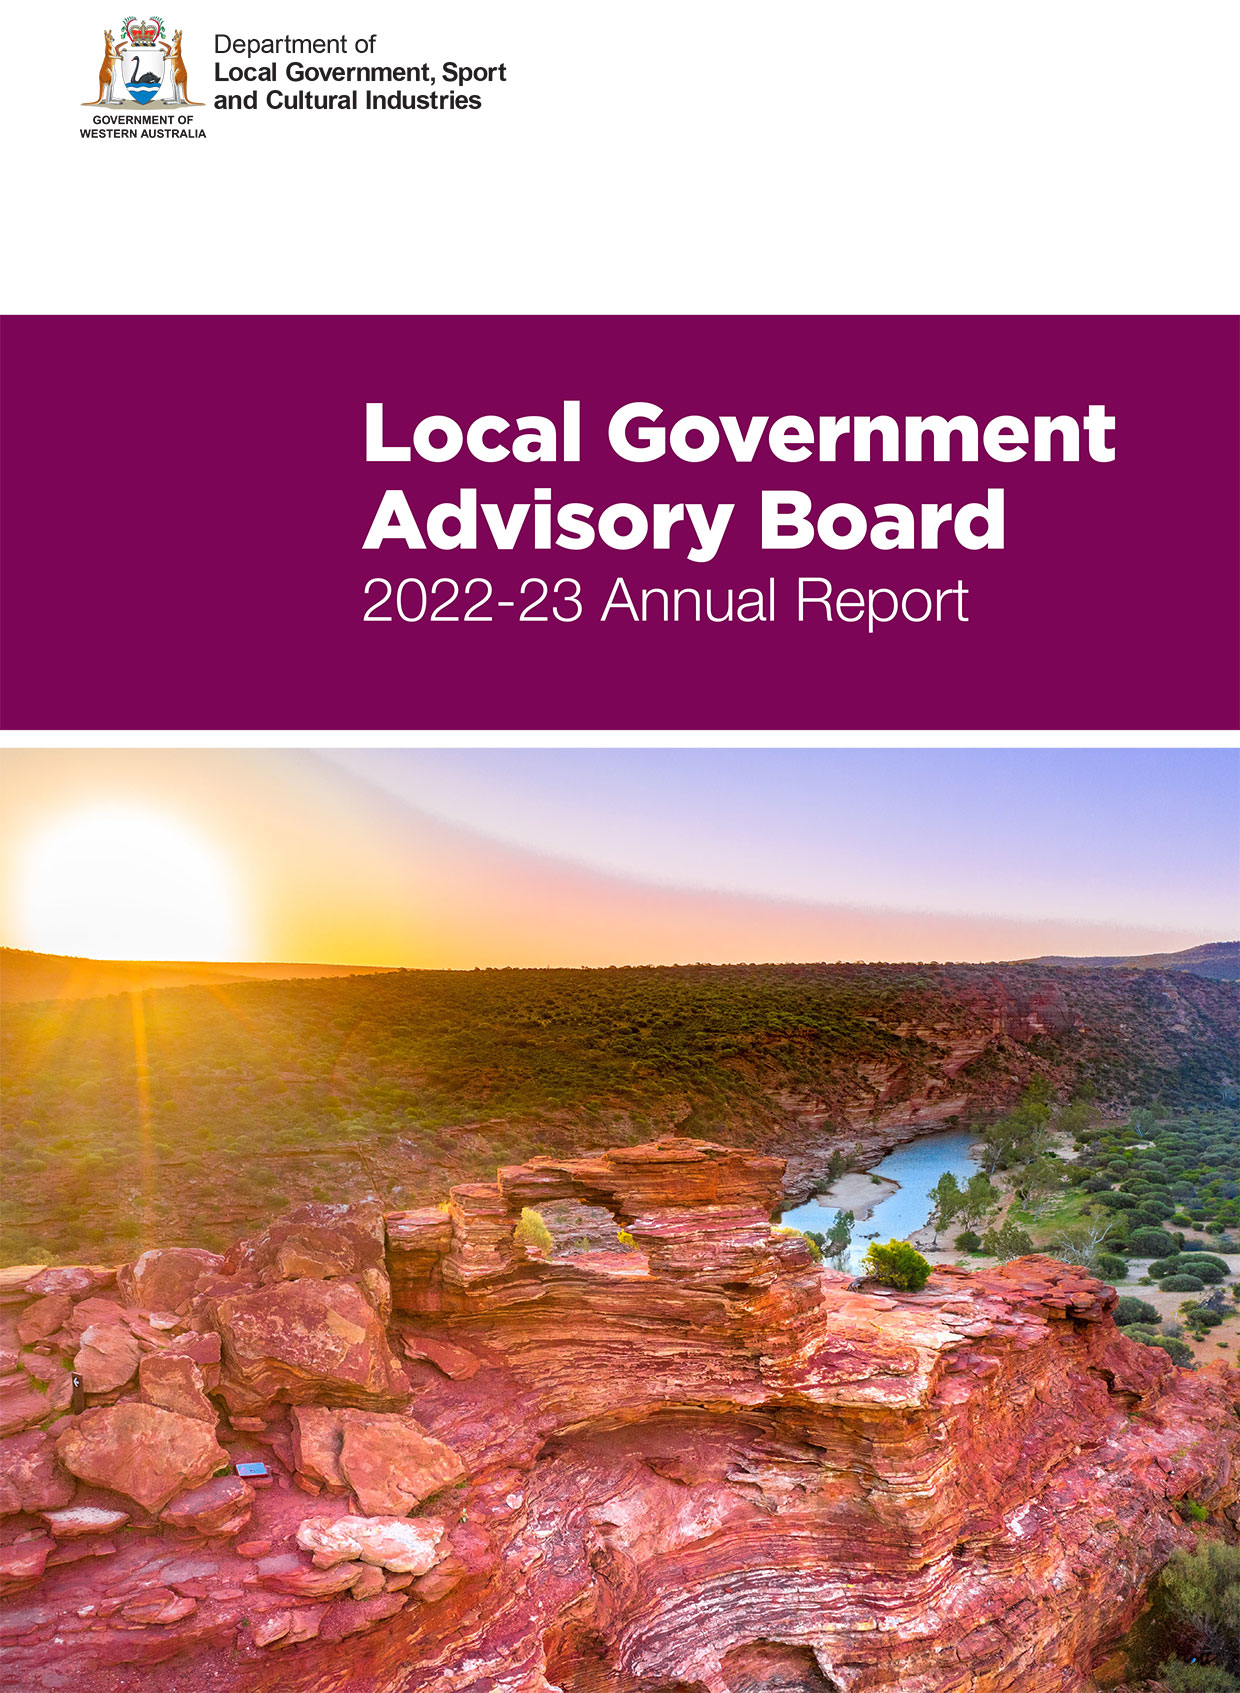 Report cover with image of hills and a gorge with water. Title reads: Local Government Advisory Board 2022-23 Annual Report